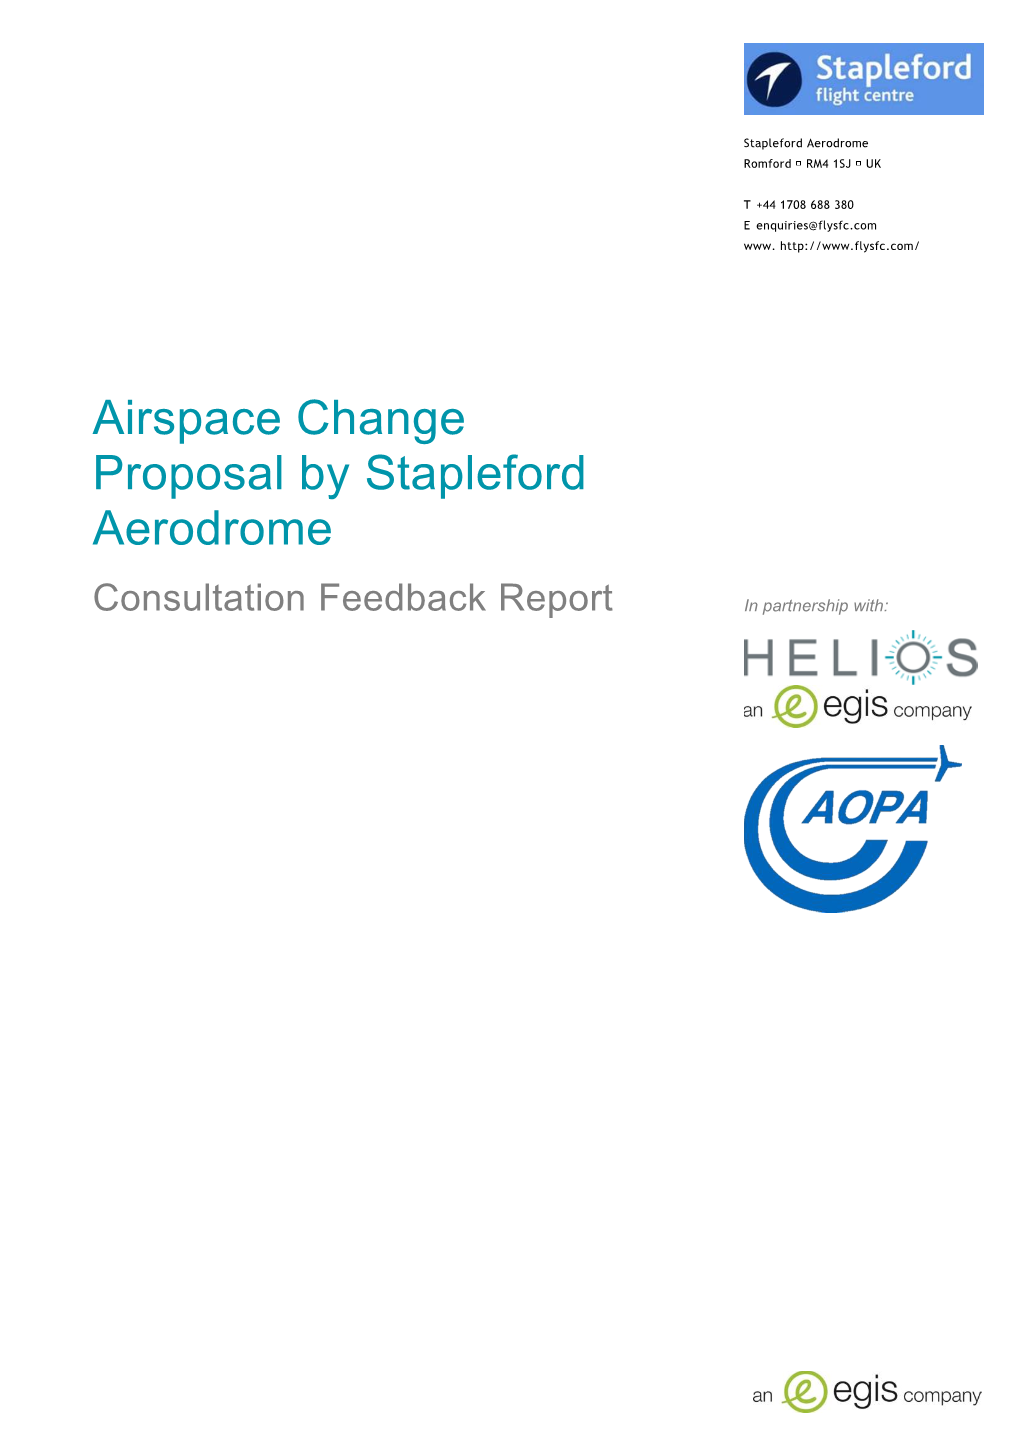 Airspace Change Proposal by Stapleford Aerodrome